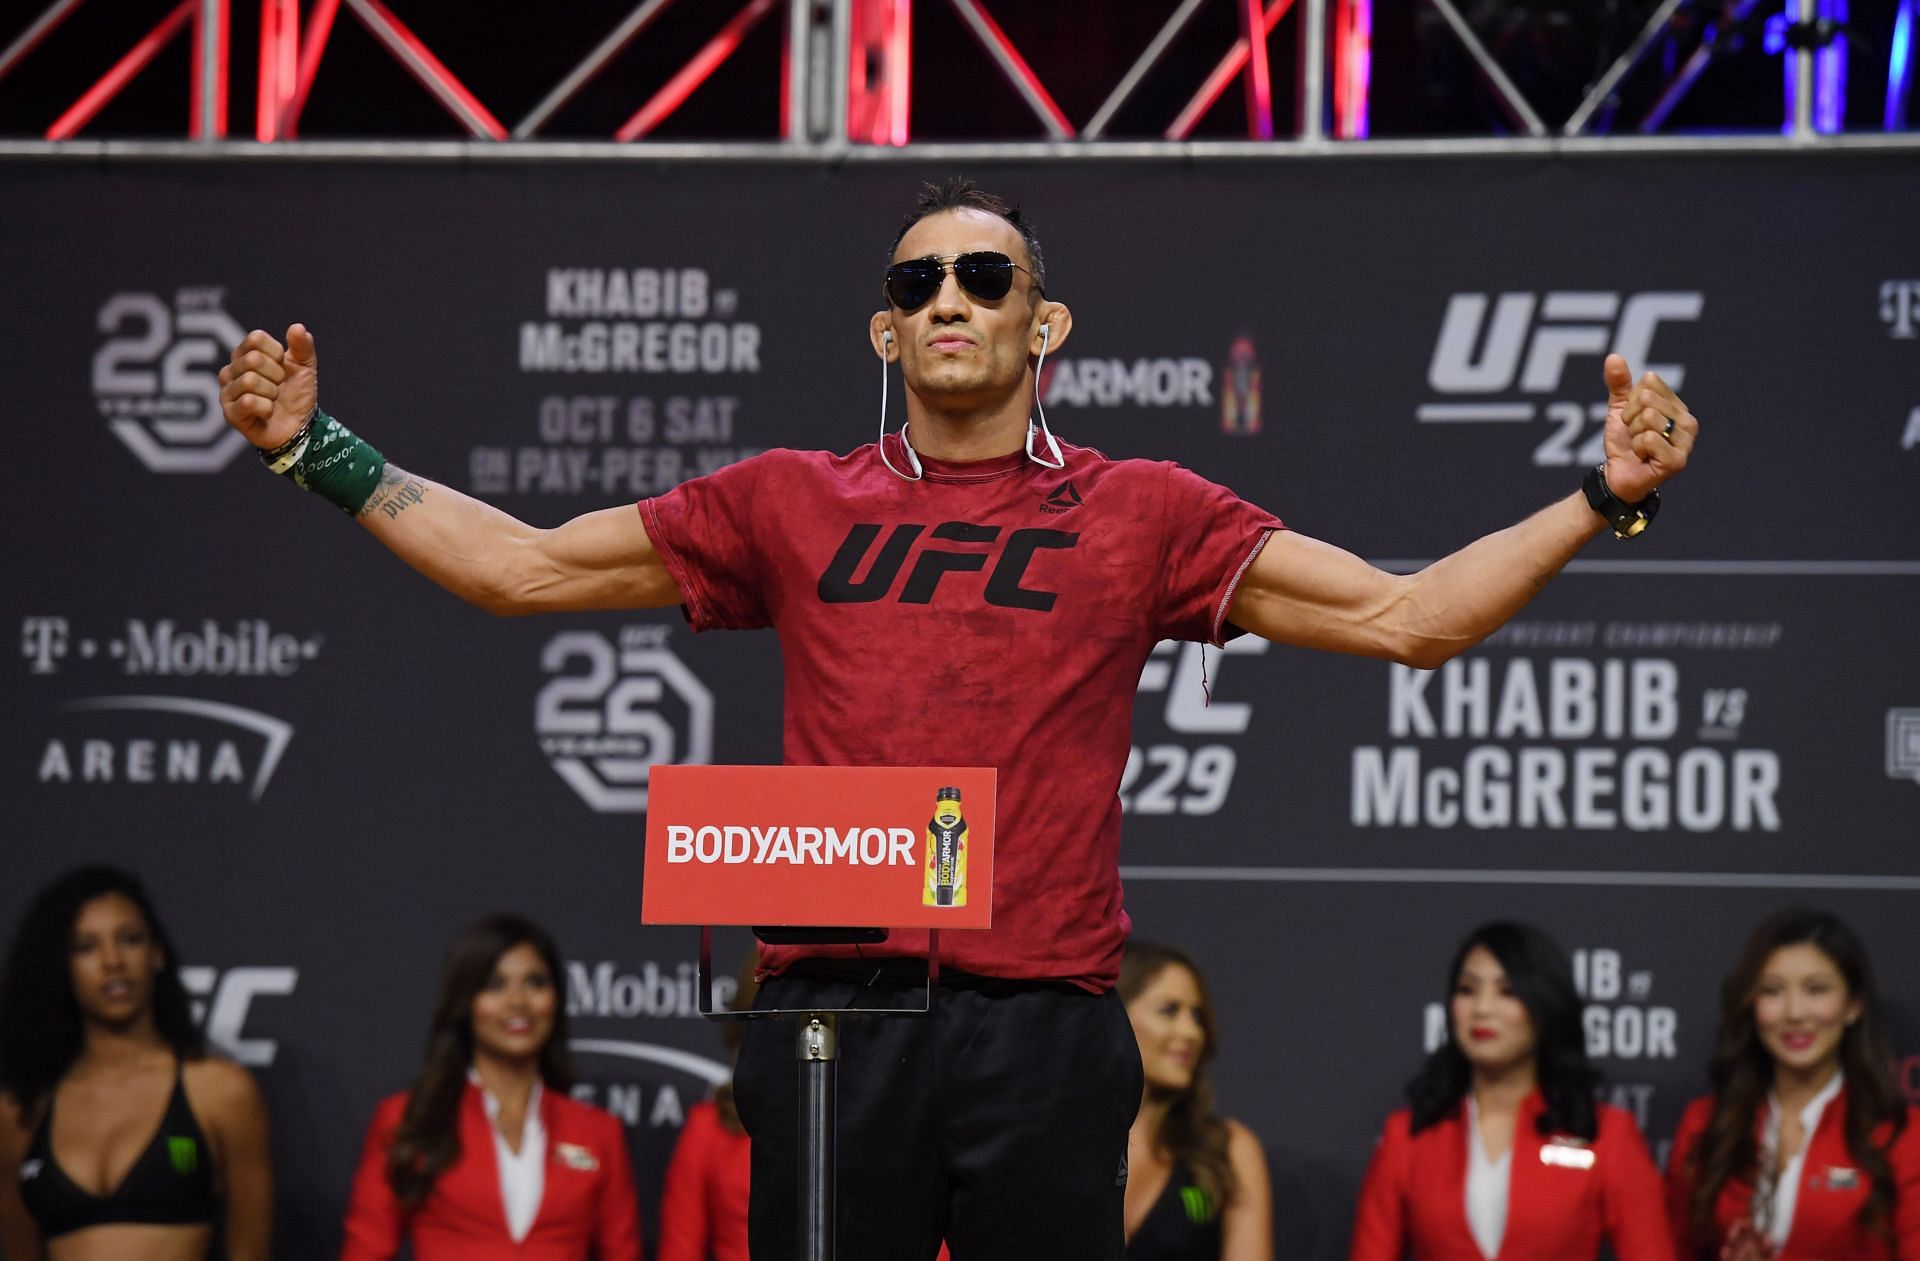 Tony Ferguson at the UFC 229 weigh-ins (Image via Getty)